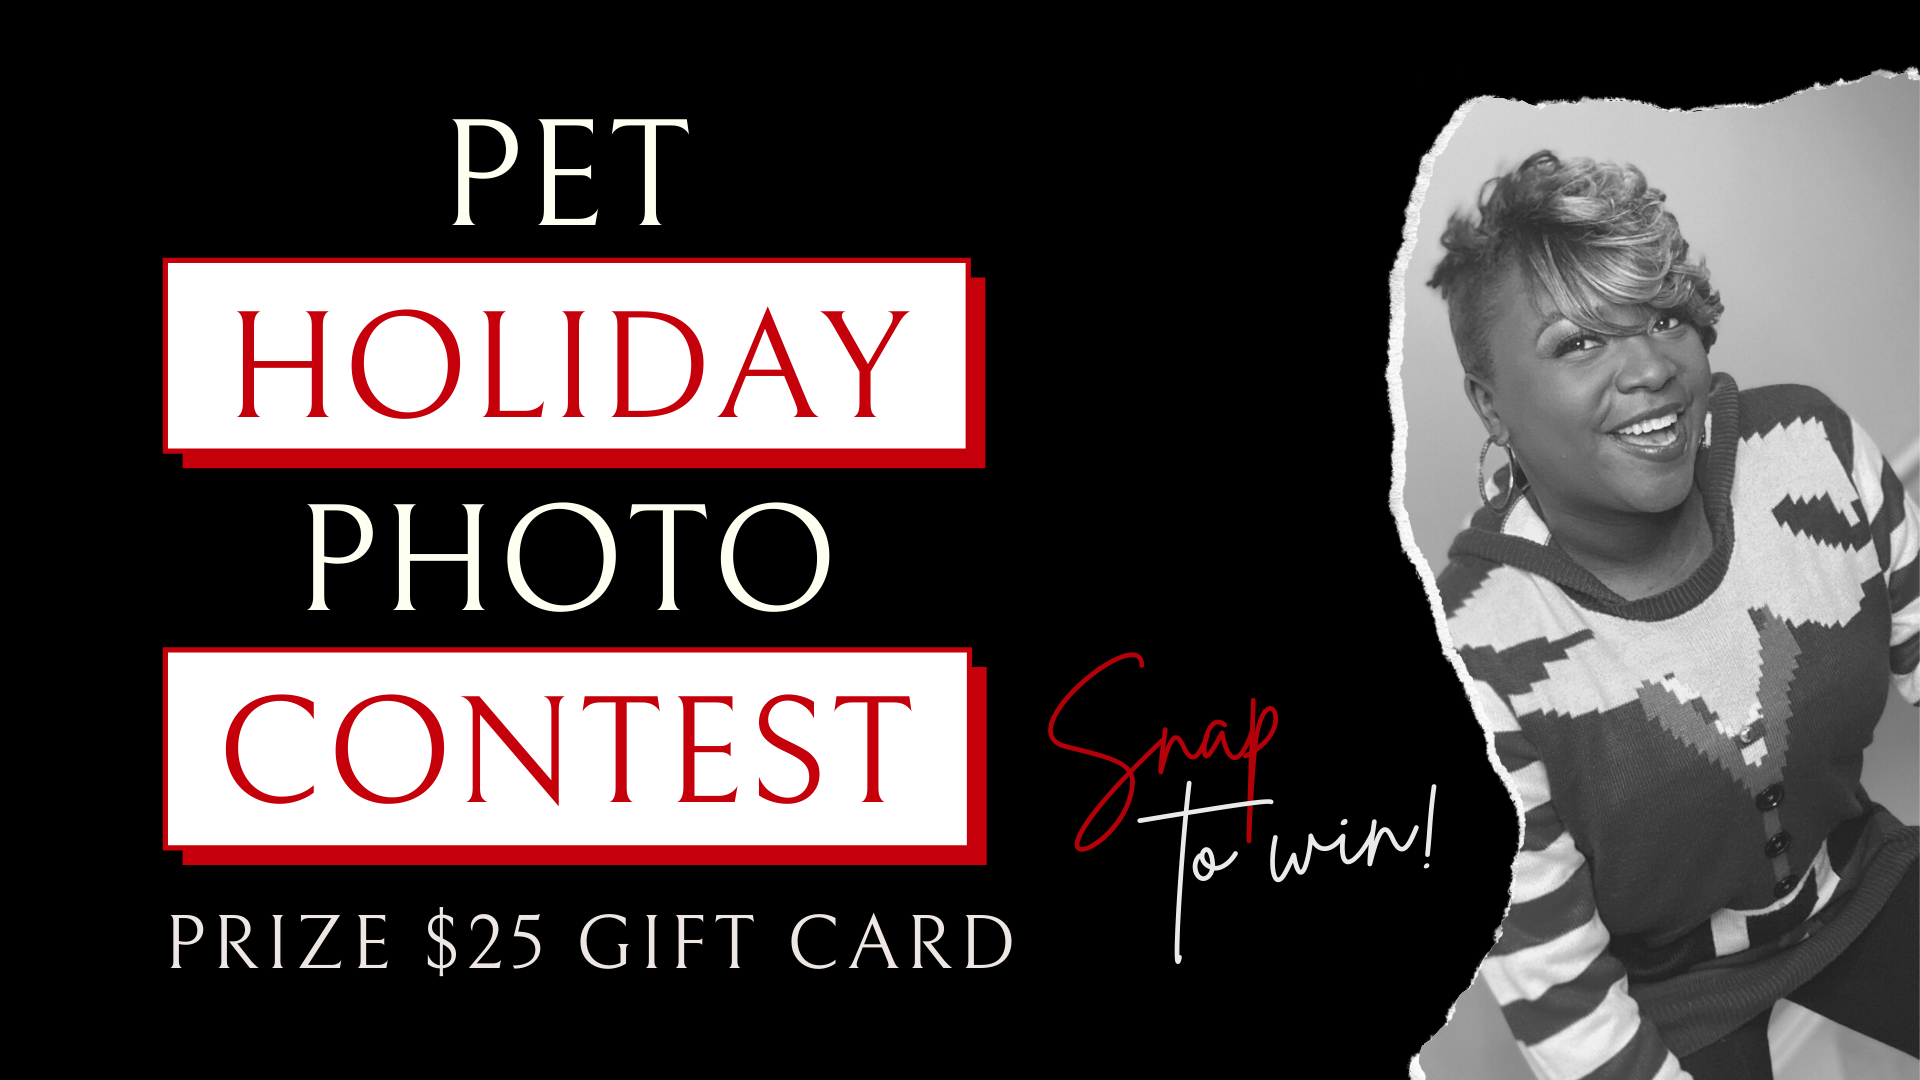 Pet Holiday Photo Contest - $25 Gift Card